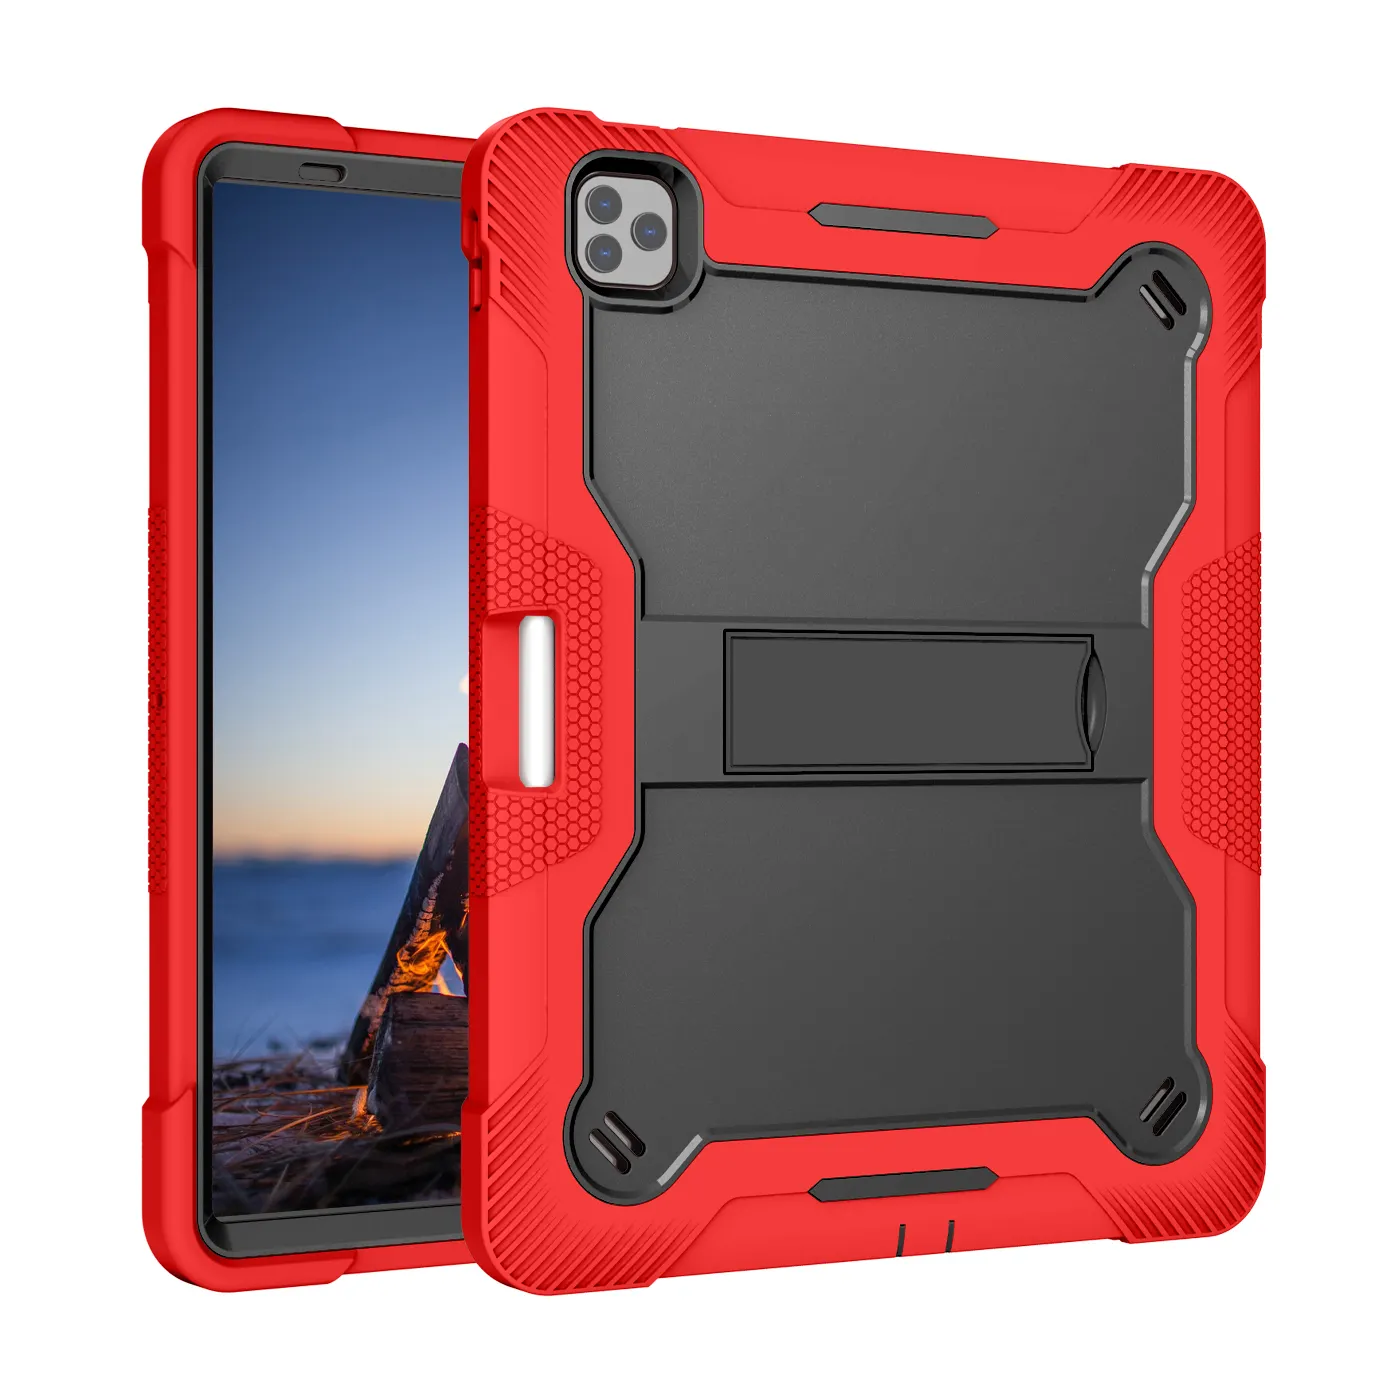 Shockproof TPU PC Armor Hybrid Stand Cover Silicone Tablet Case for iPad Pro 12.9